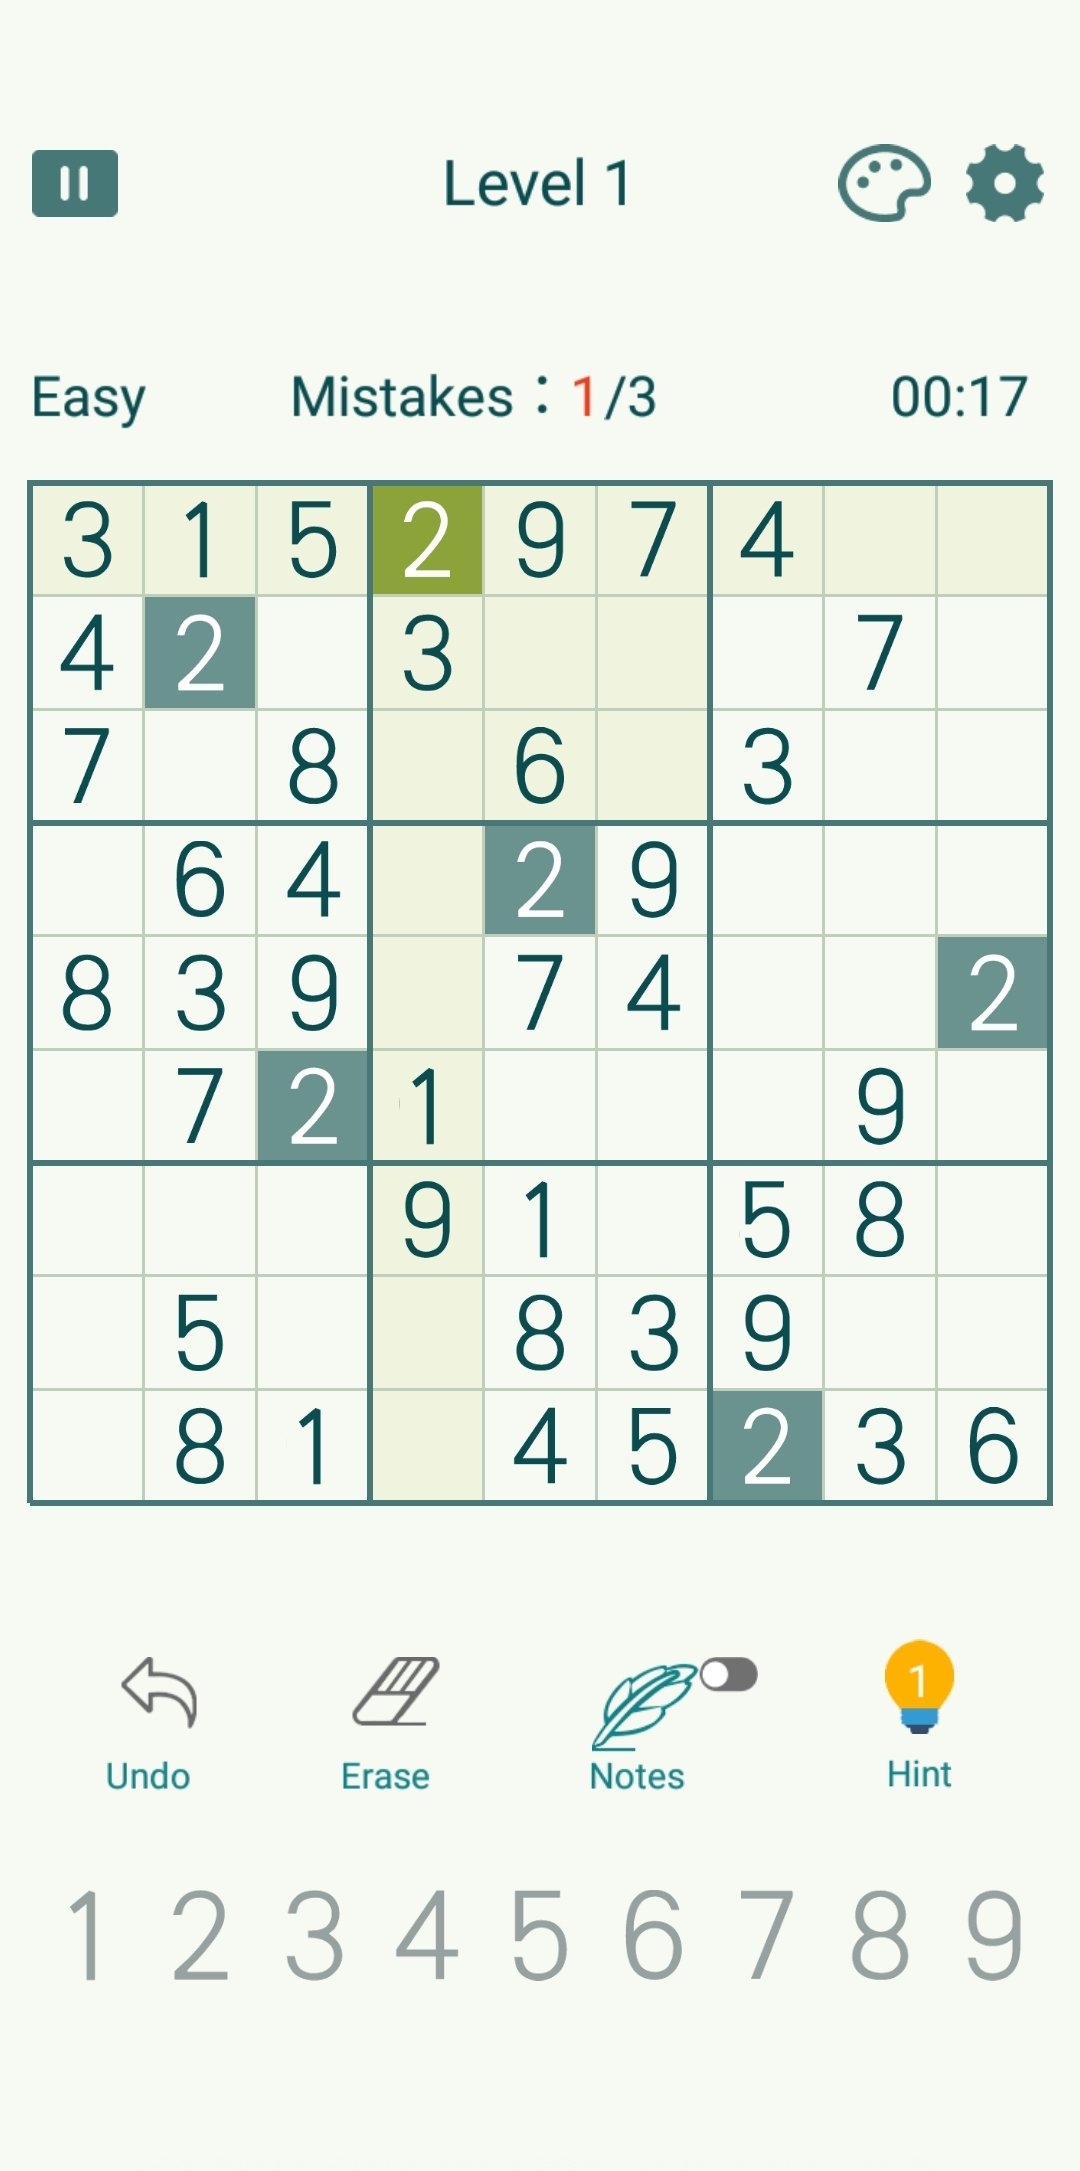 Download do APK de Sudoku with Step by Step Hints para Android